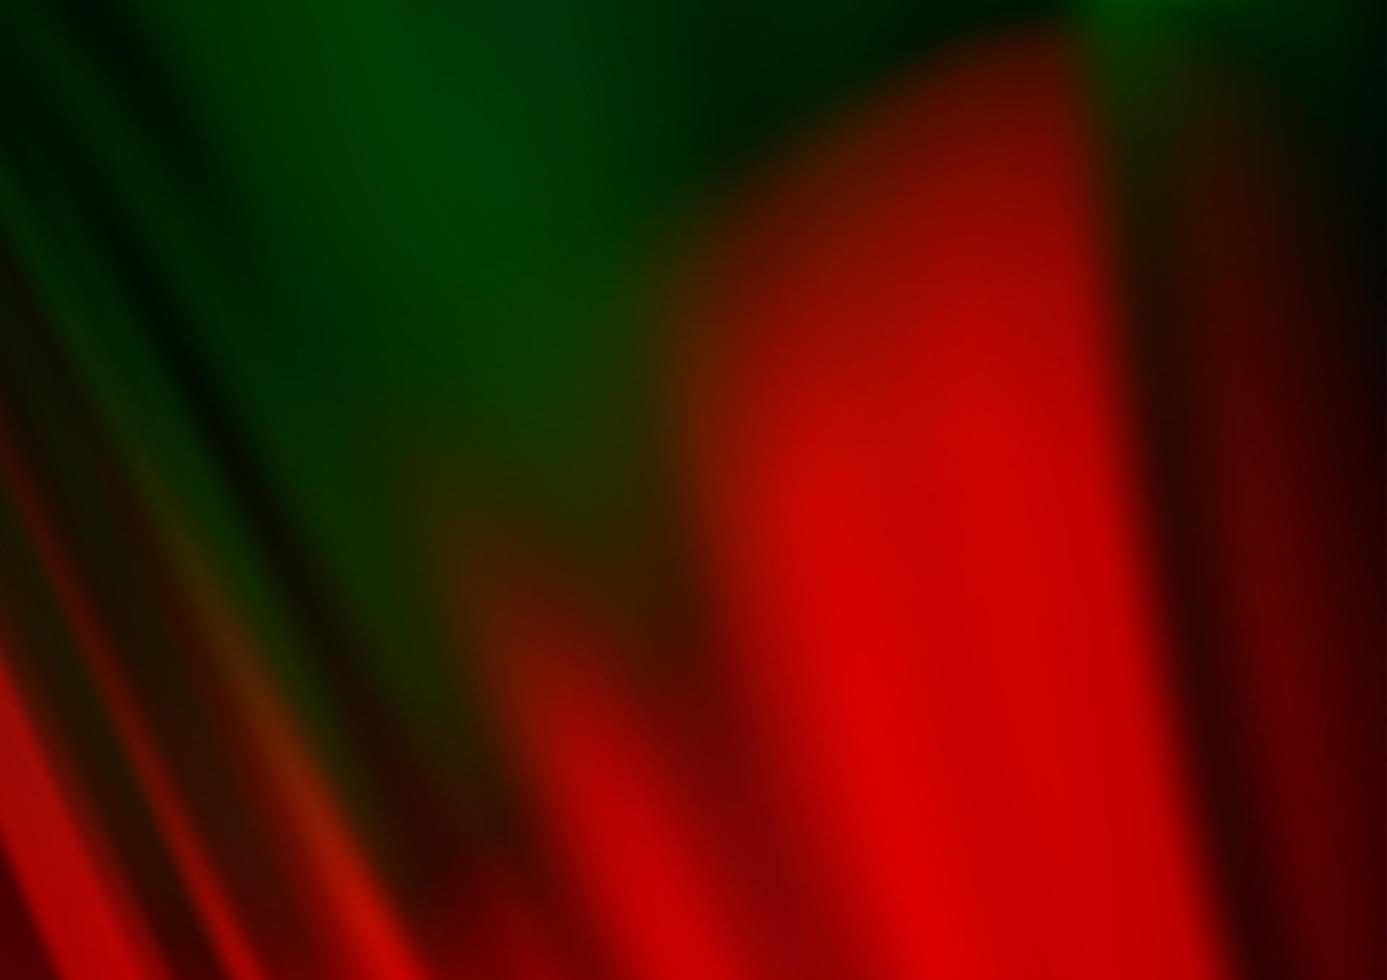 Dark Green, Red vector background with abstract lines.